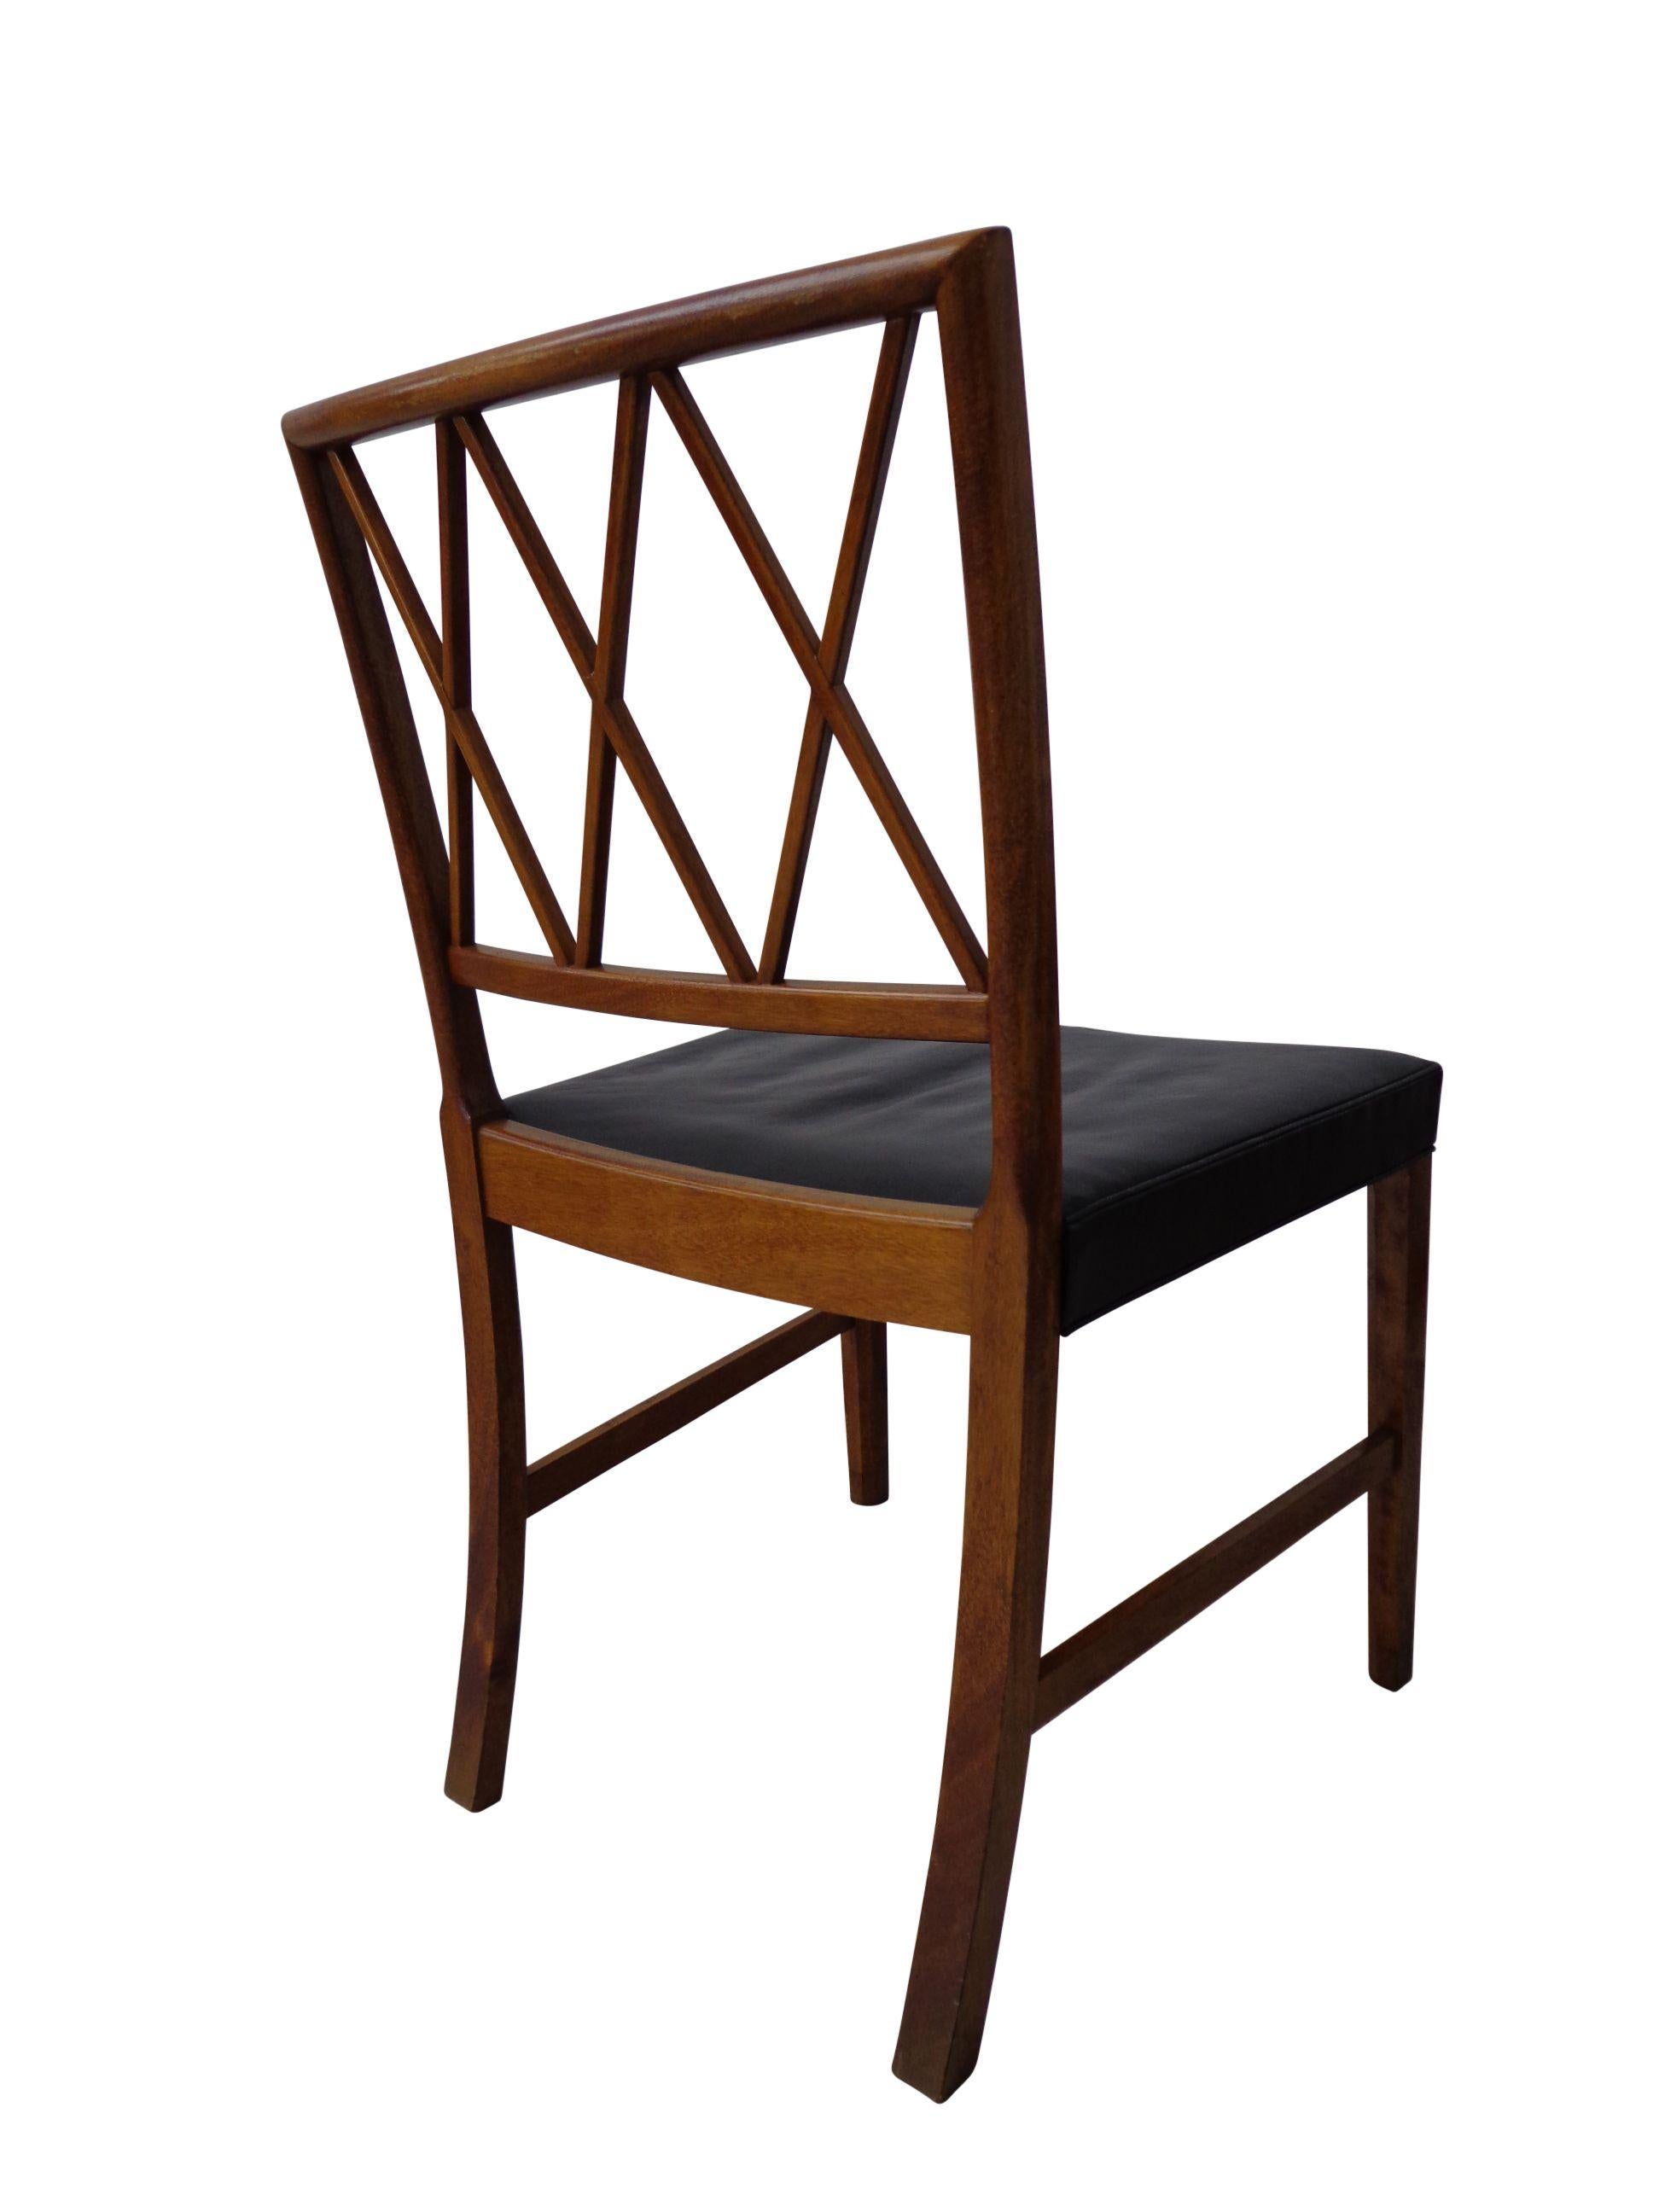 Ole Wanscher Dining Chairs by Cabinetmaker A.J Iversen in Denmark 1940s For Sale 6